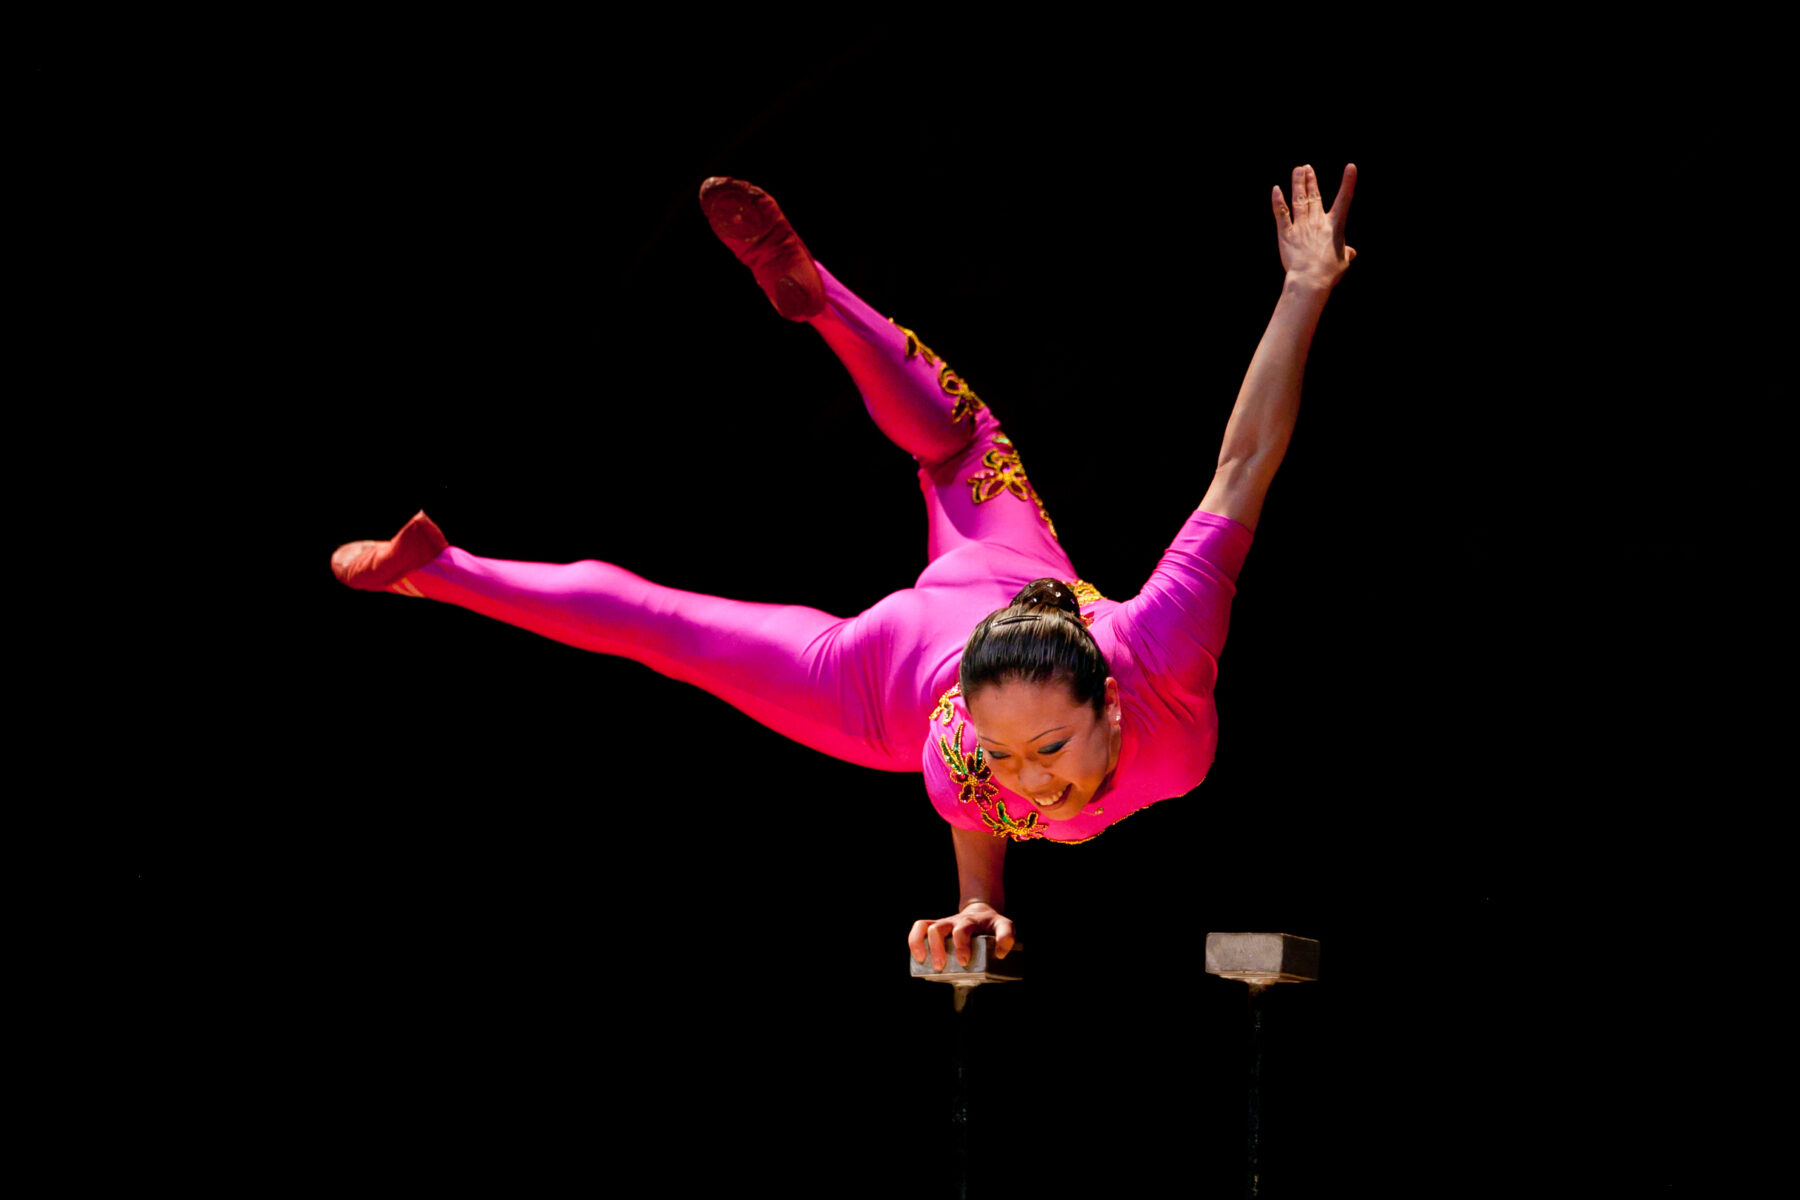 A performer is balancing on one hand